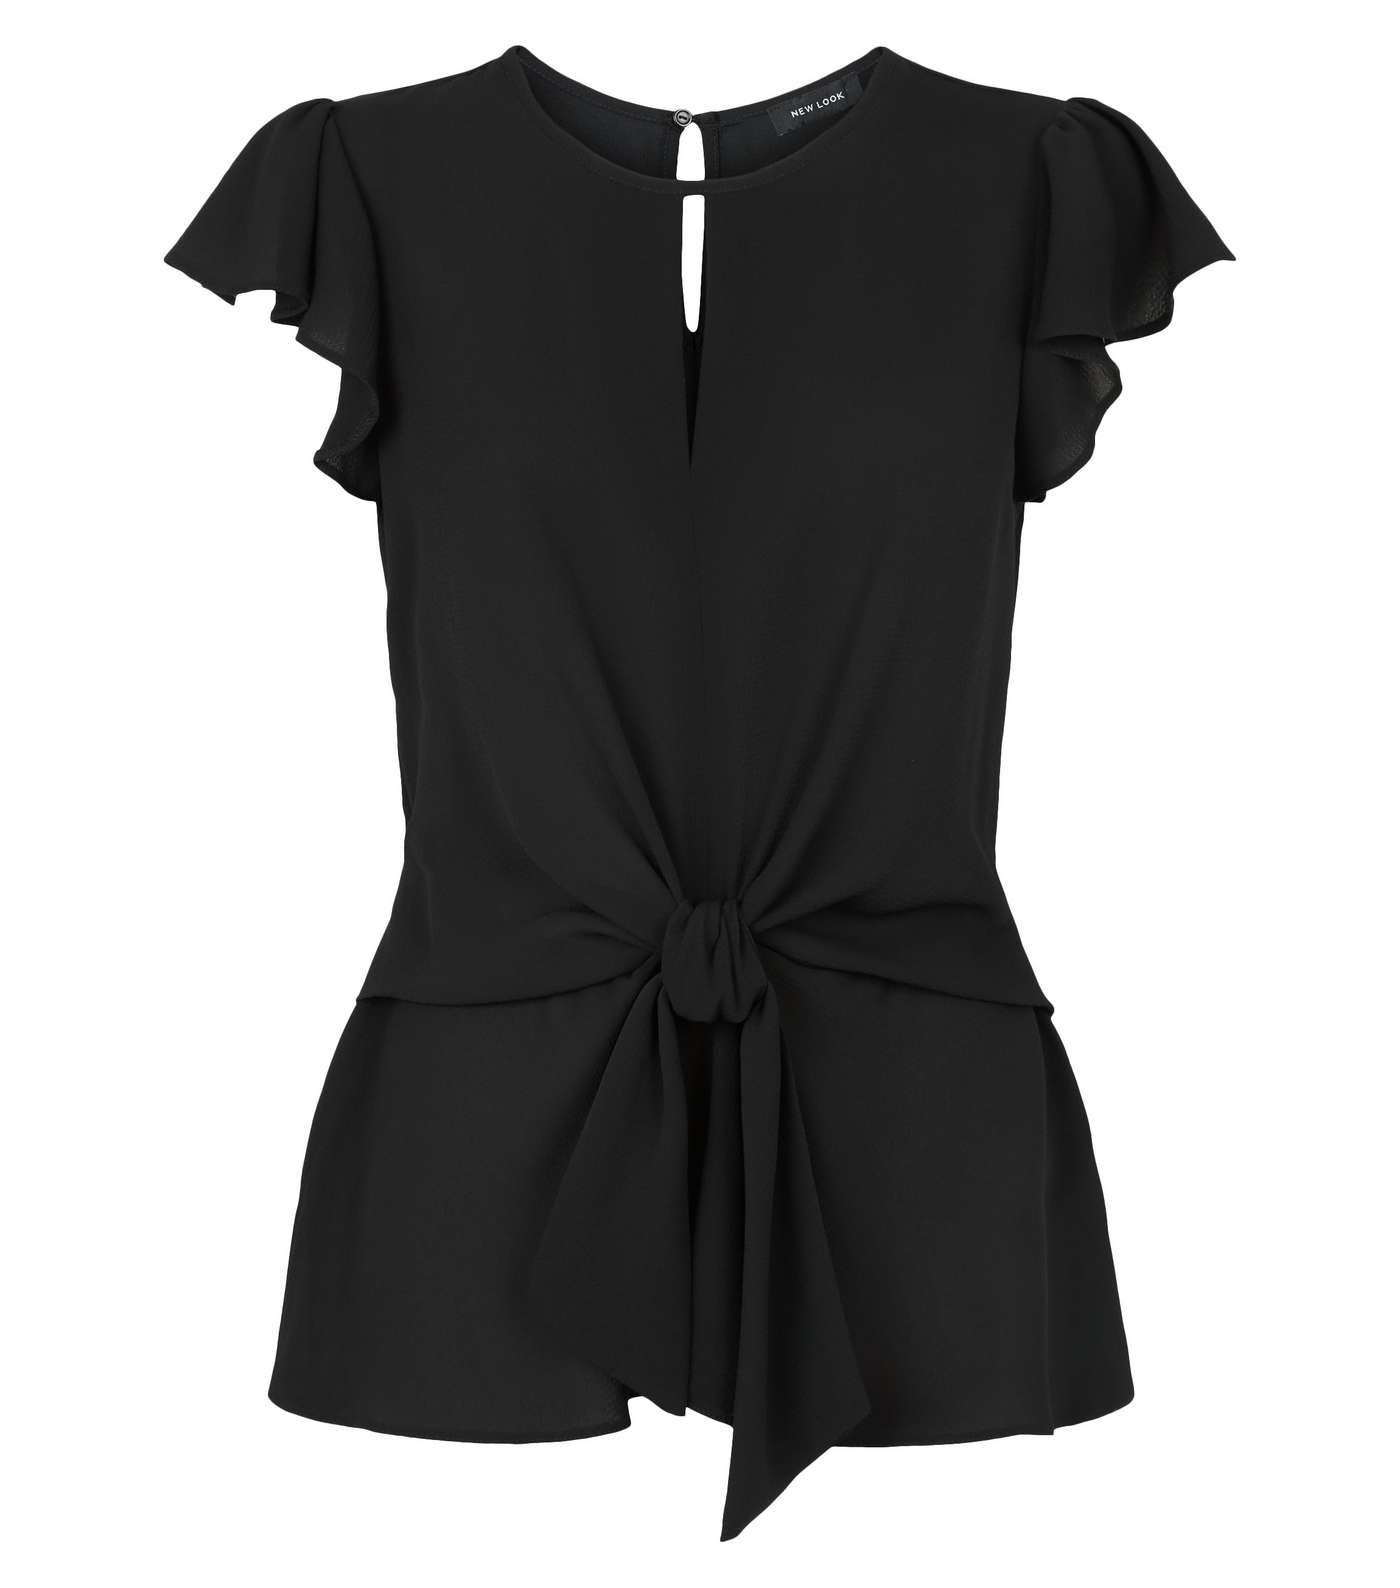 Black Frill Tie Front Top Image 4